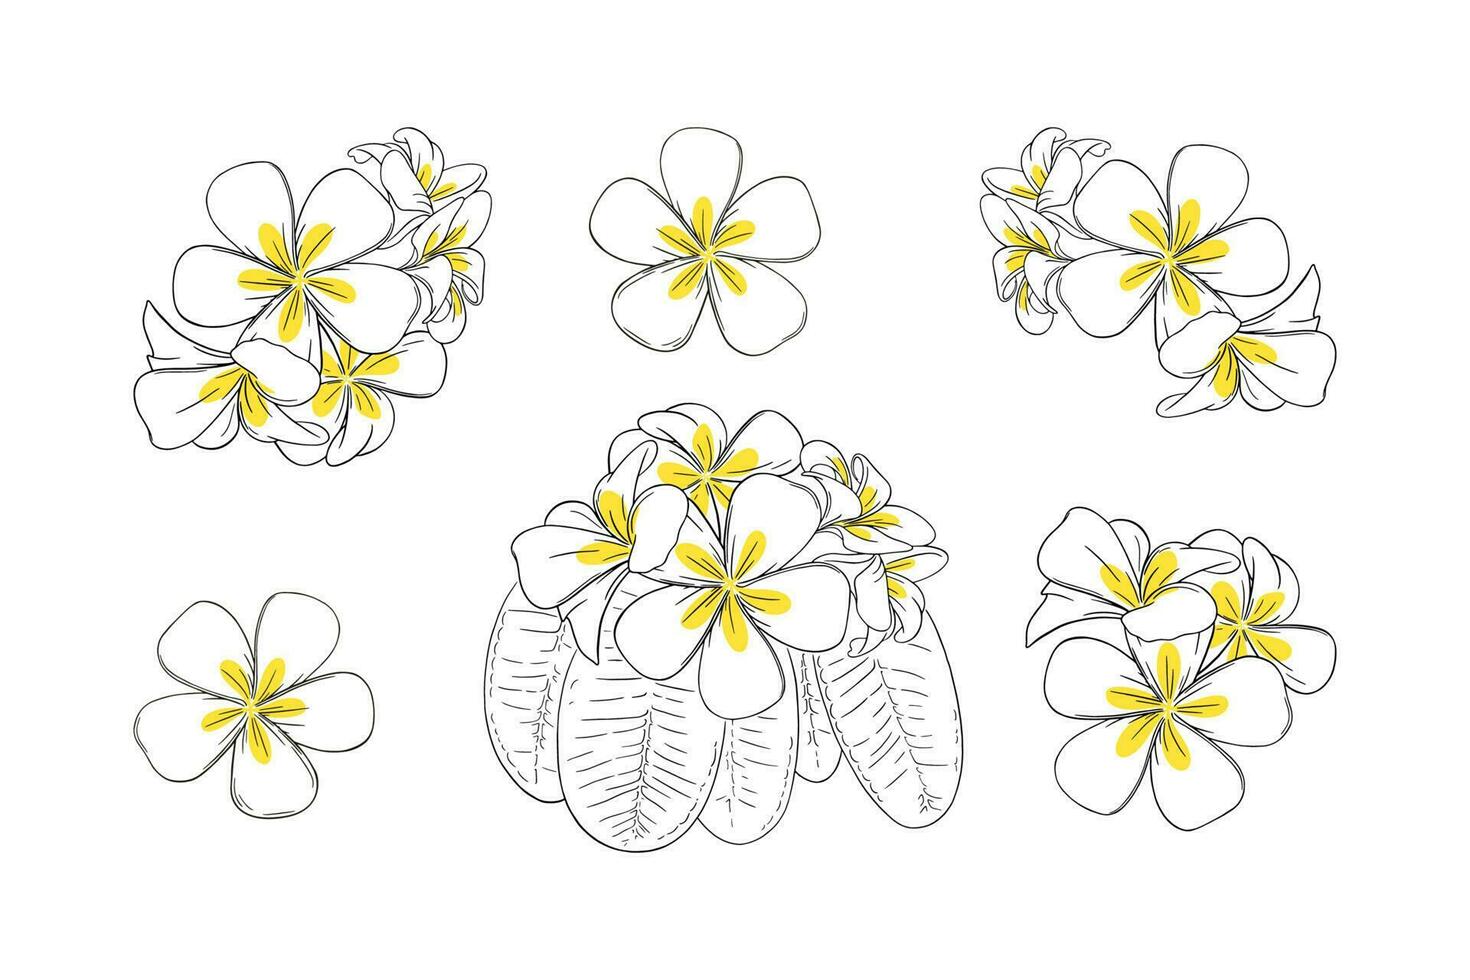 Frangipani or plumeria tropical flower for leis. Hand drawn frangipani with yellow petals isolated in white background. Outline vector illustration